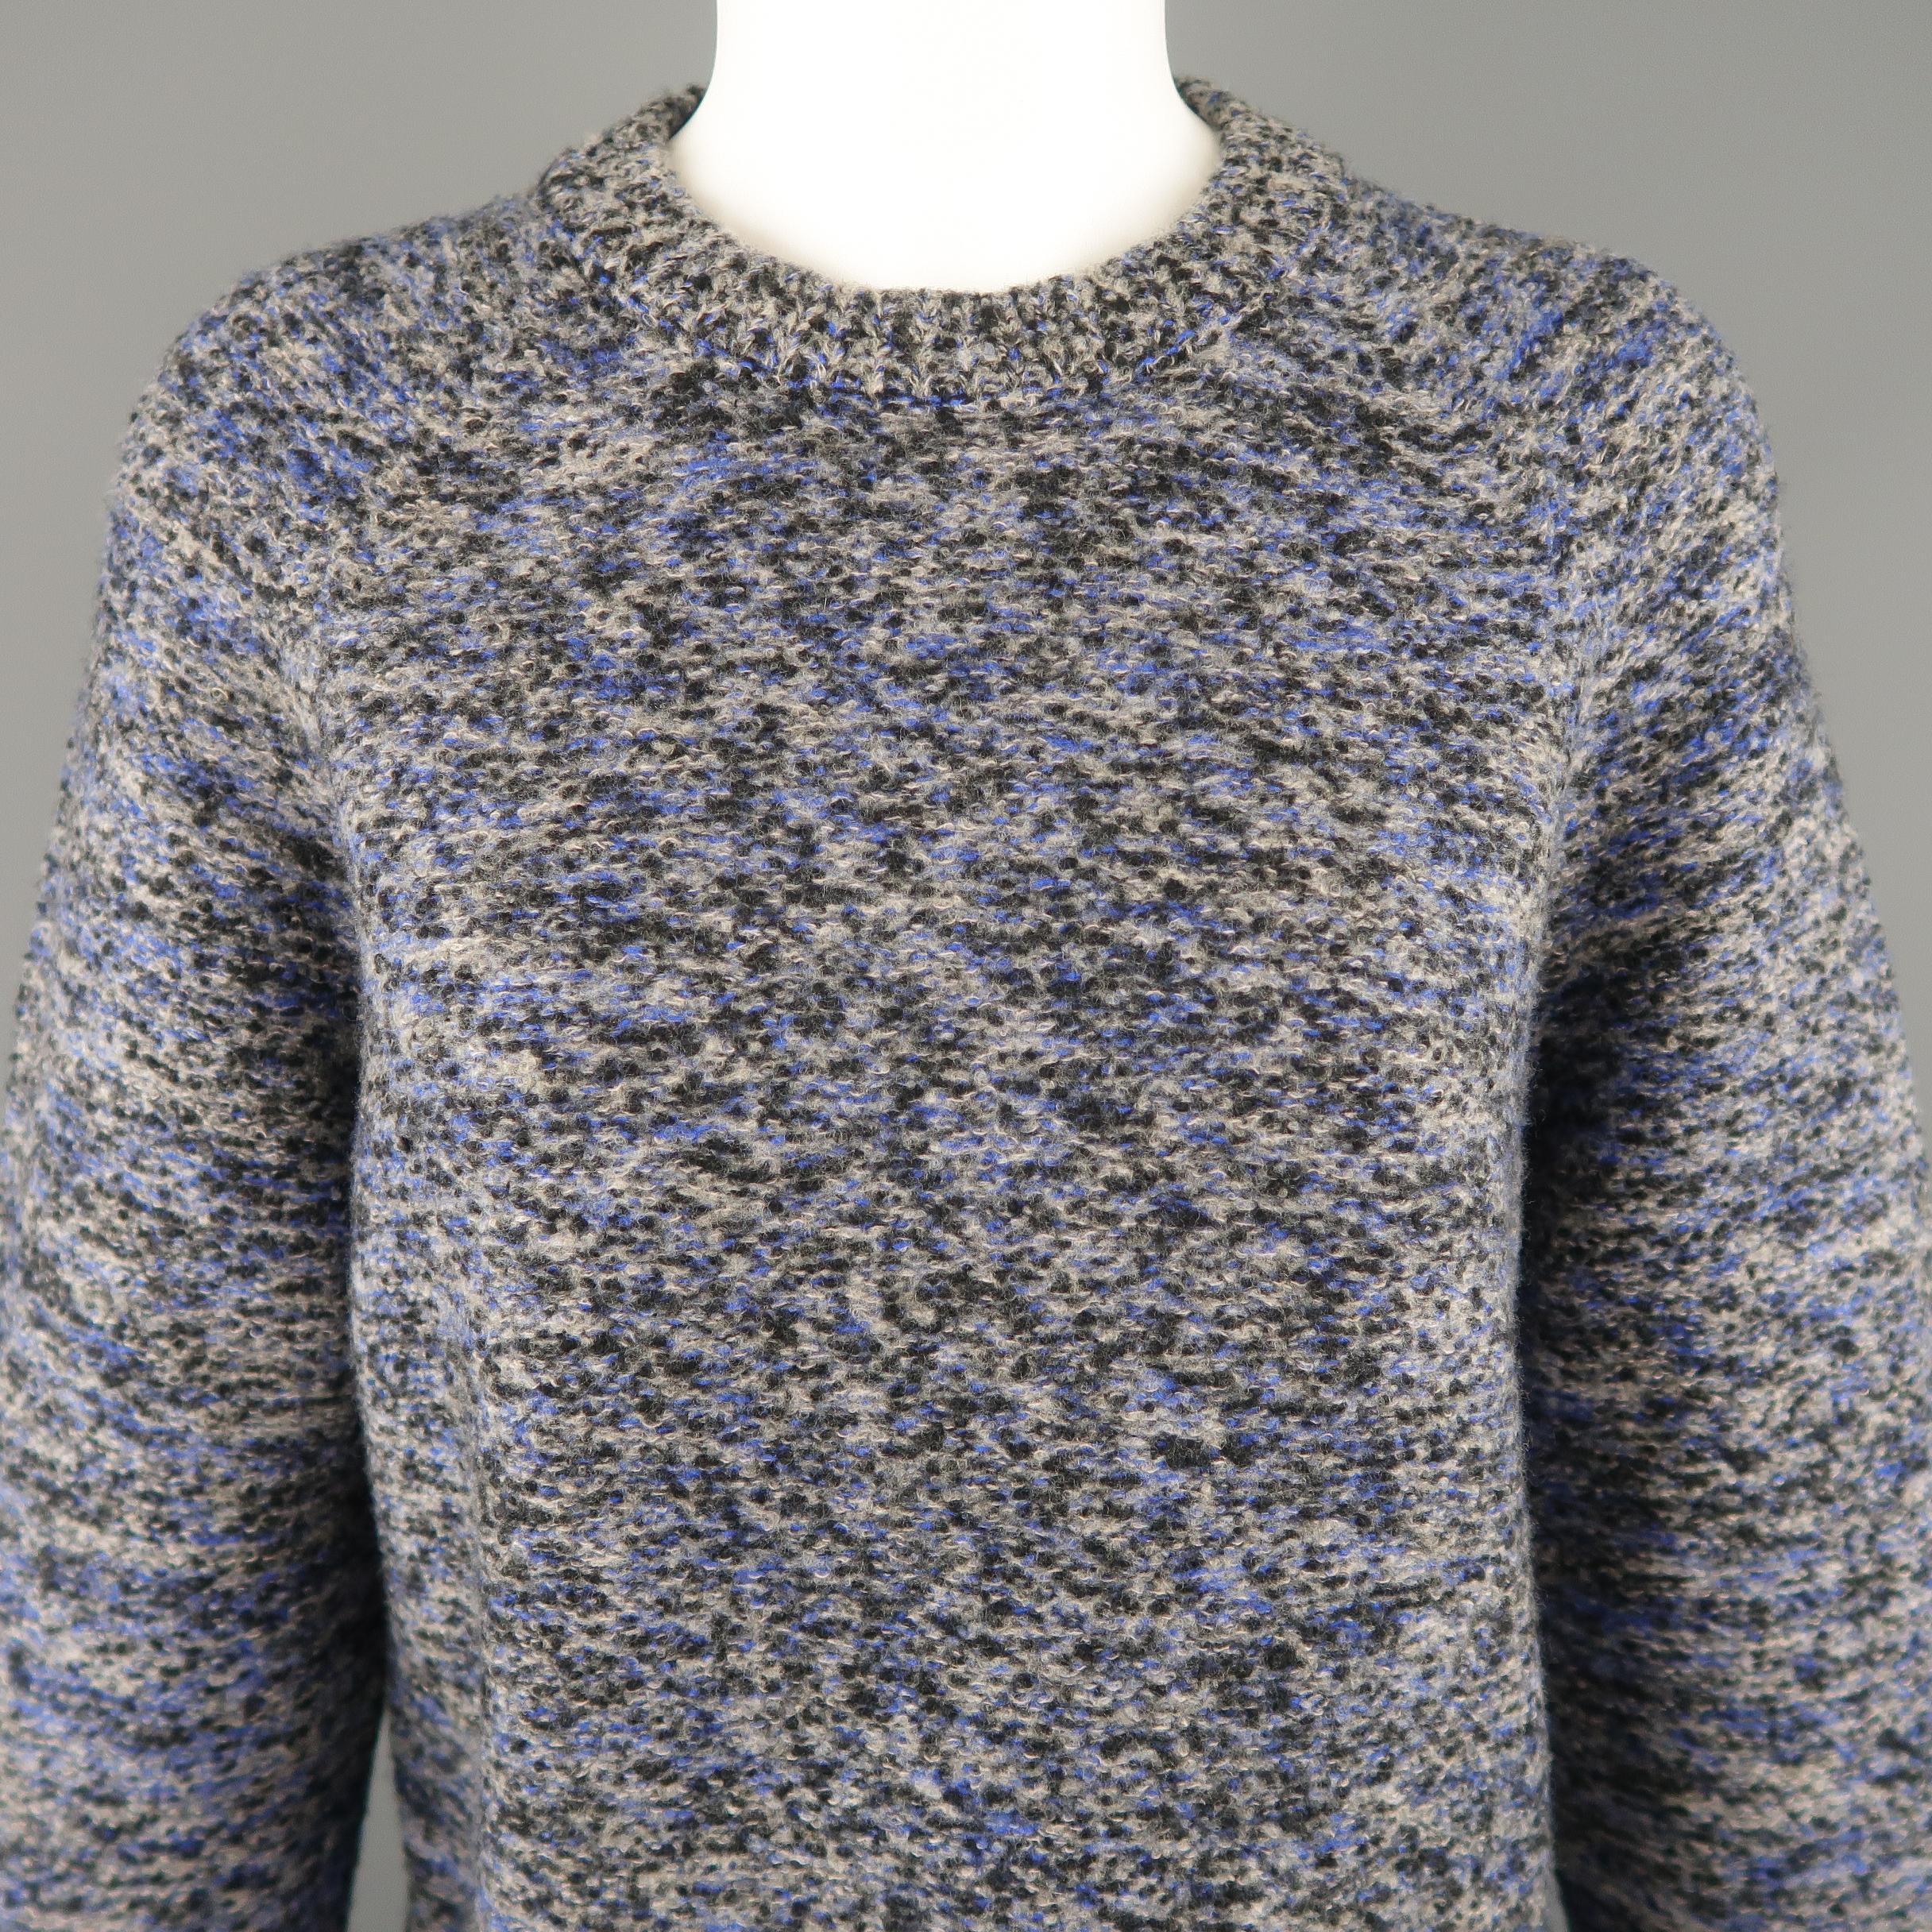 PROENZA SCHOULER pullover sweater comes in a blue and gray marbled effect heather knit with a structured oversized silhouette, ribbed crewneck and curved hem.
 
Excellent Pre-Owned Condition.
Marked: XS
 
Measurements:
 
Shoulder: 16 in.
Bust: 40